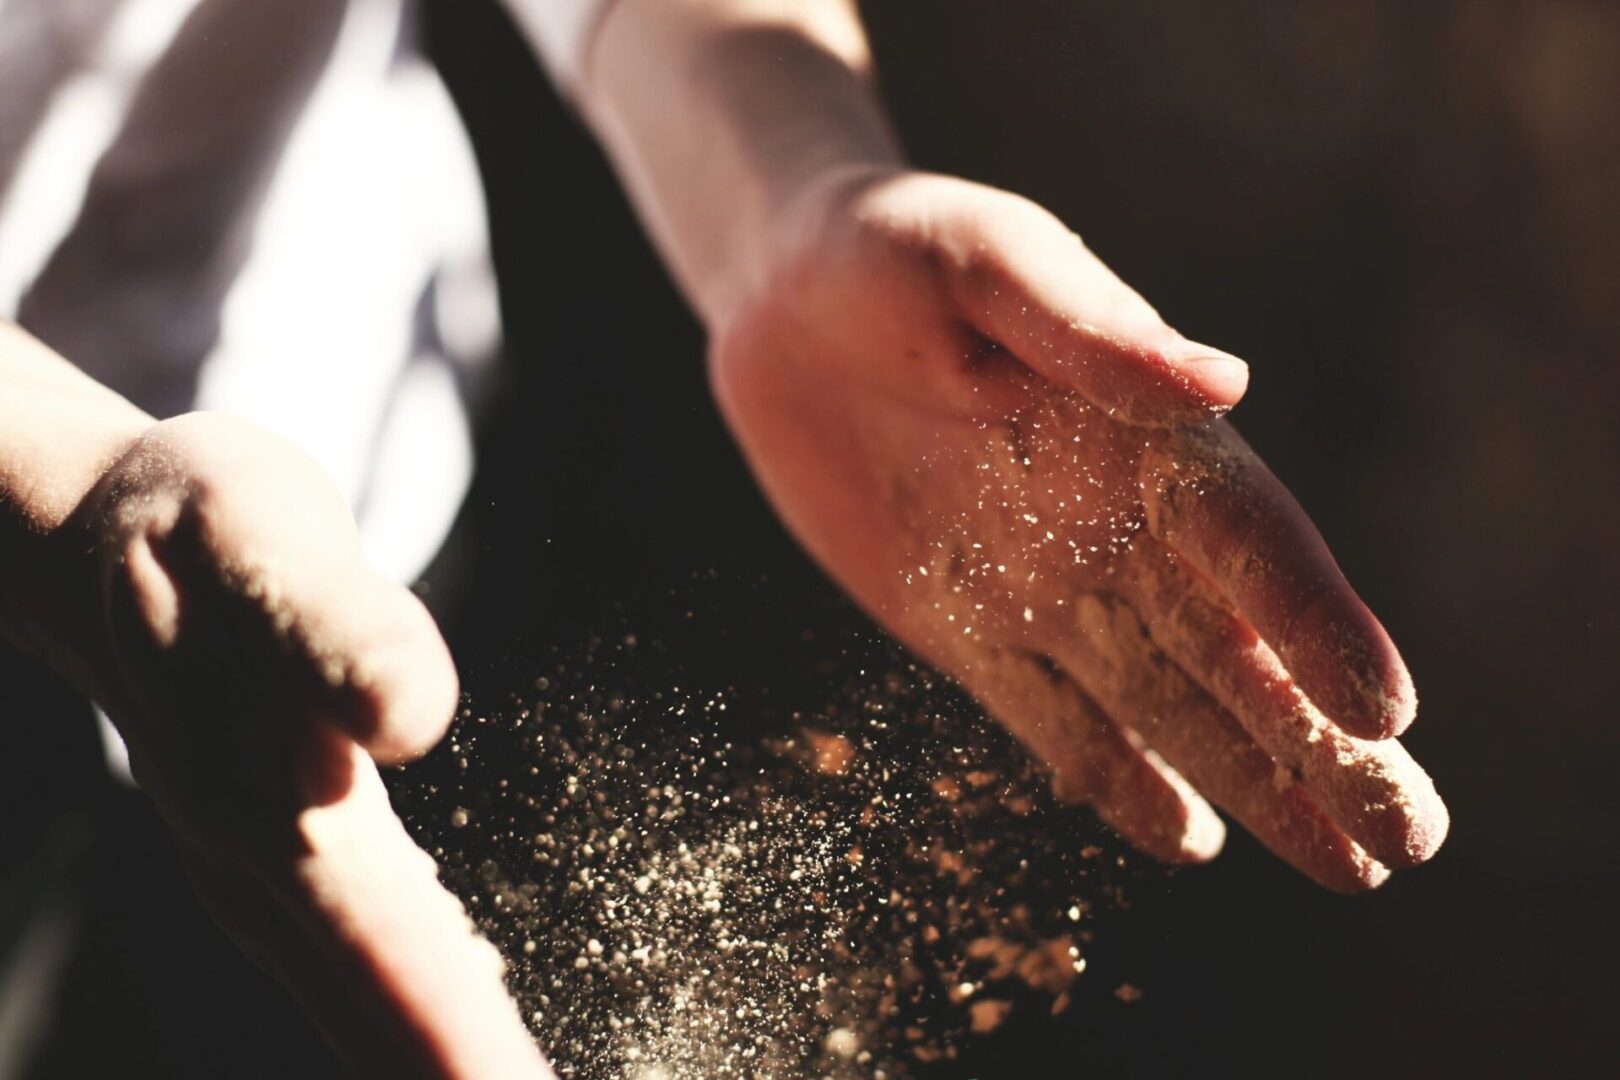 A person 's hands reaching for some sand